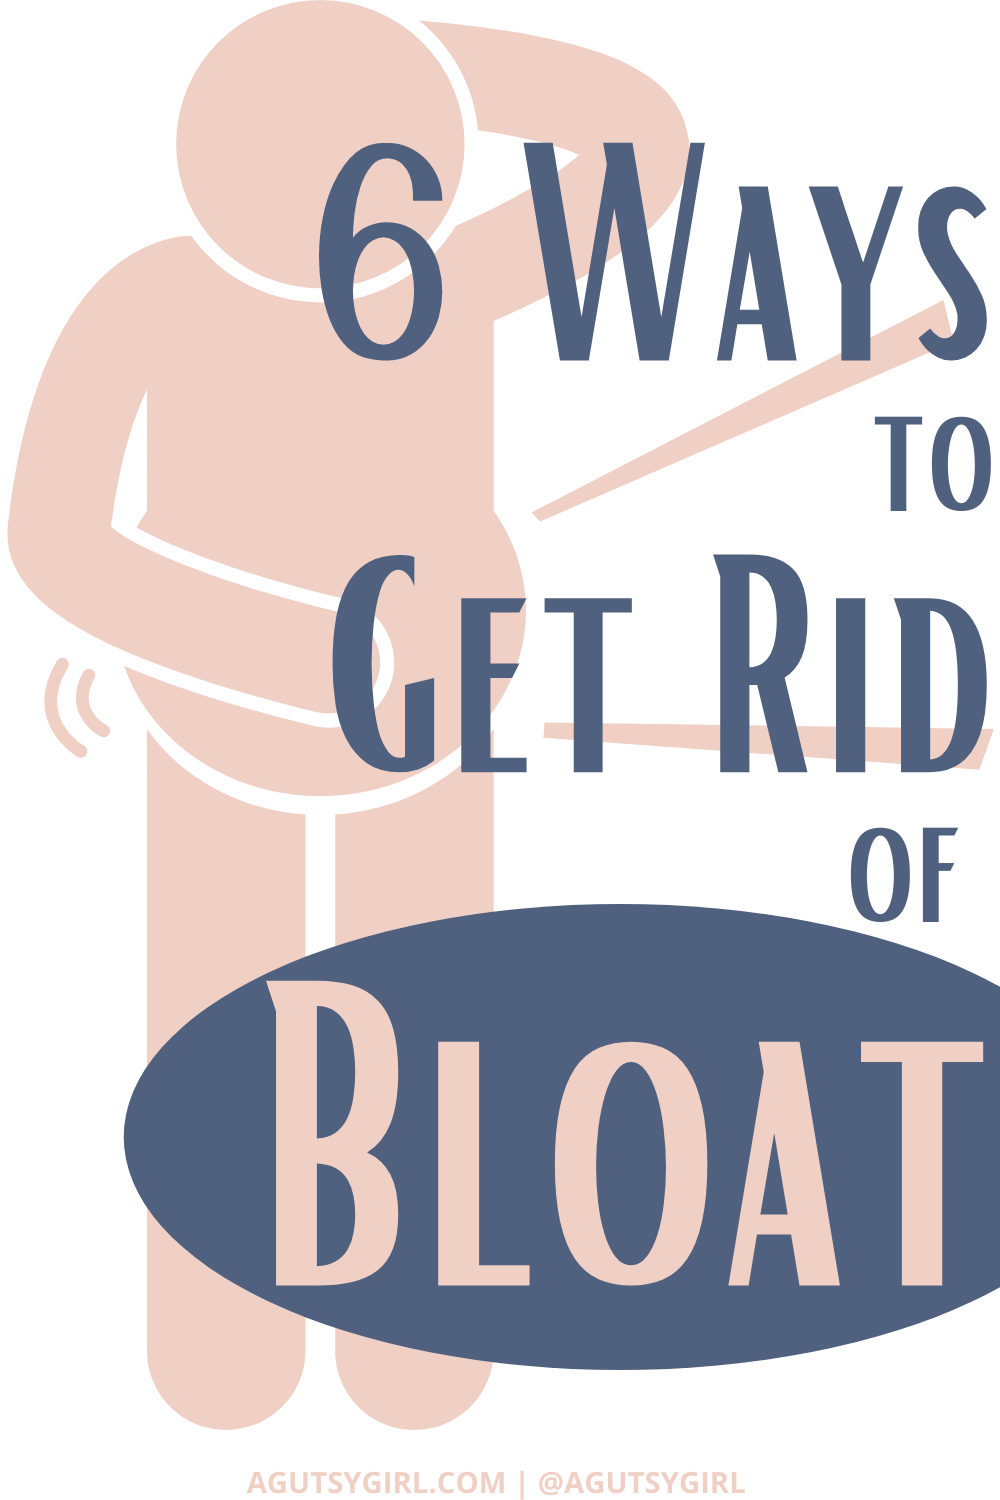 6 Ways to Get Rid of Bloat agutsygirl.com #bloated #bloat #constipation